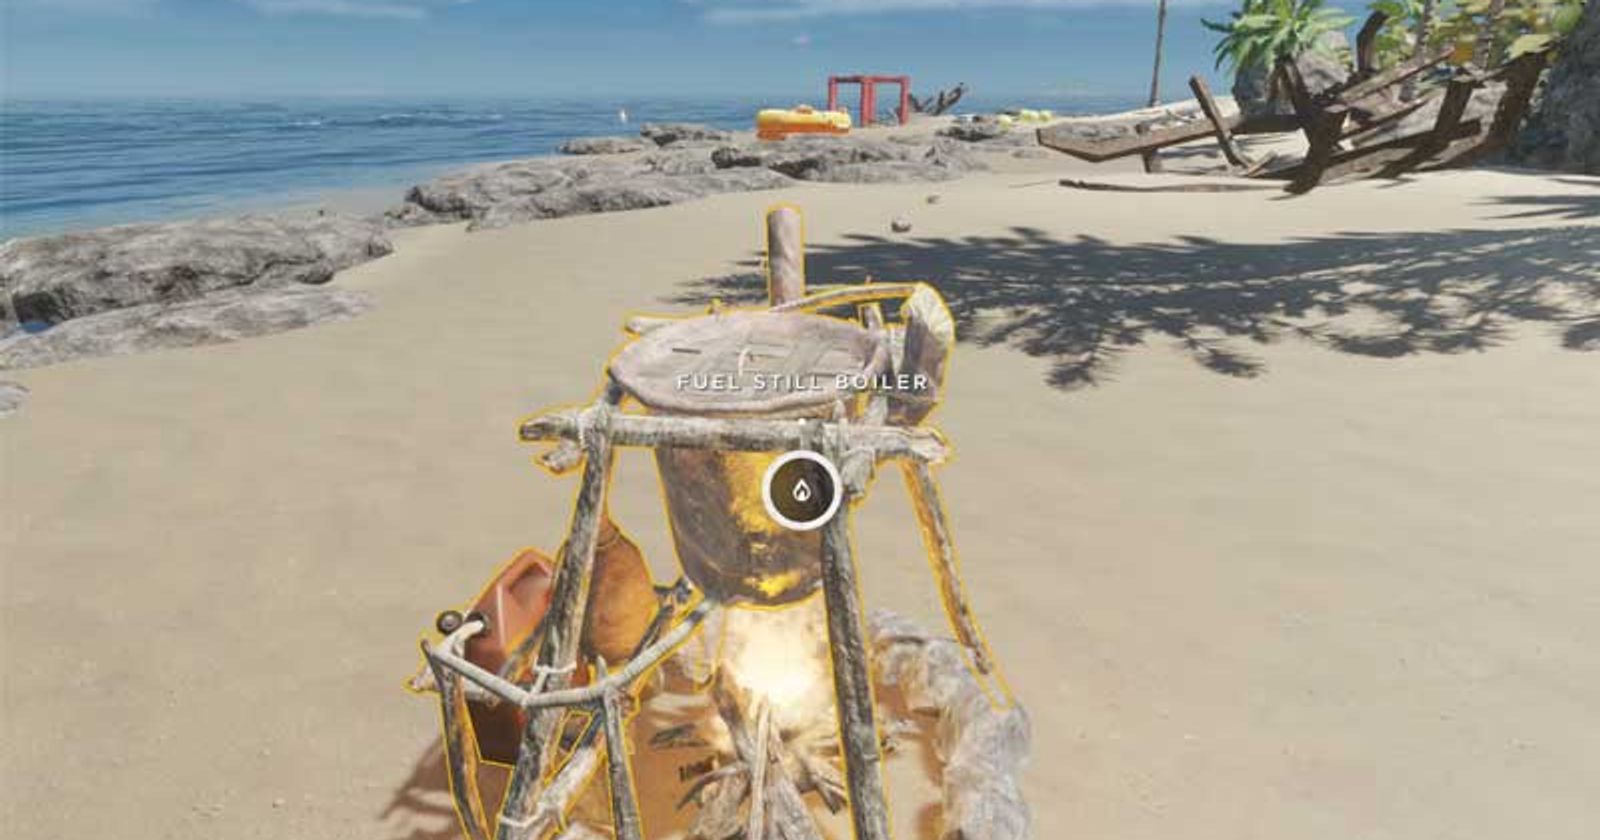 Stranded Deep - Stranded Deep updated their cover photo.